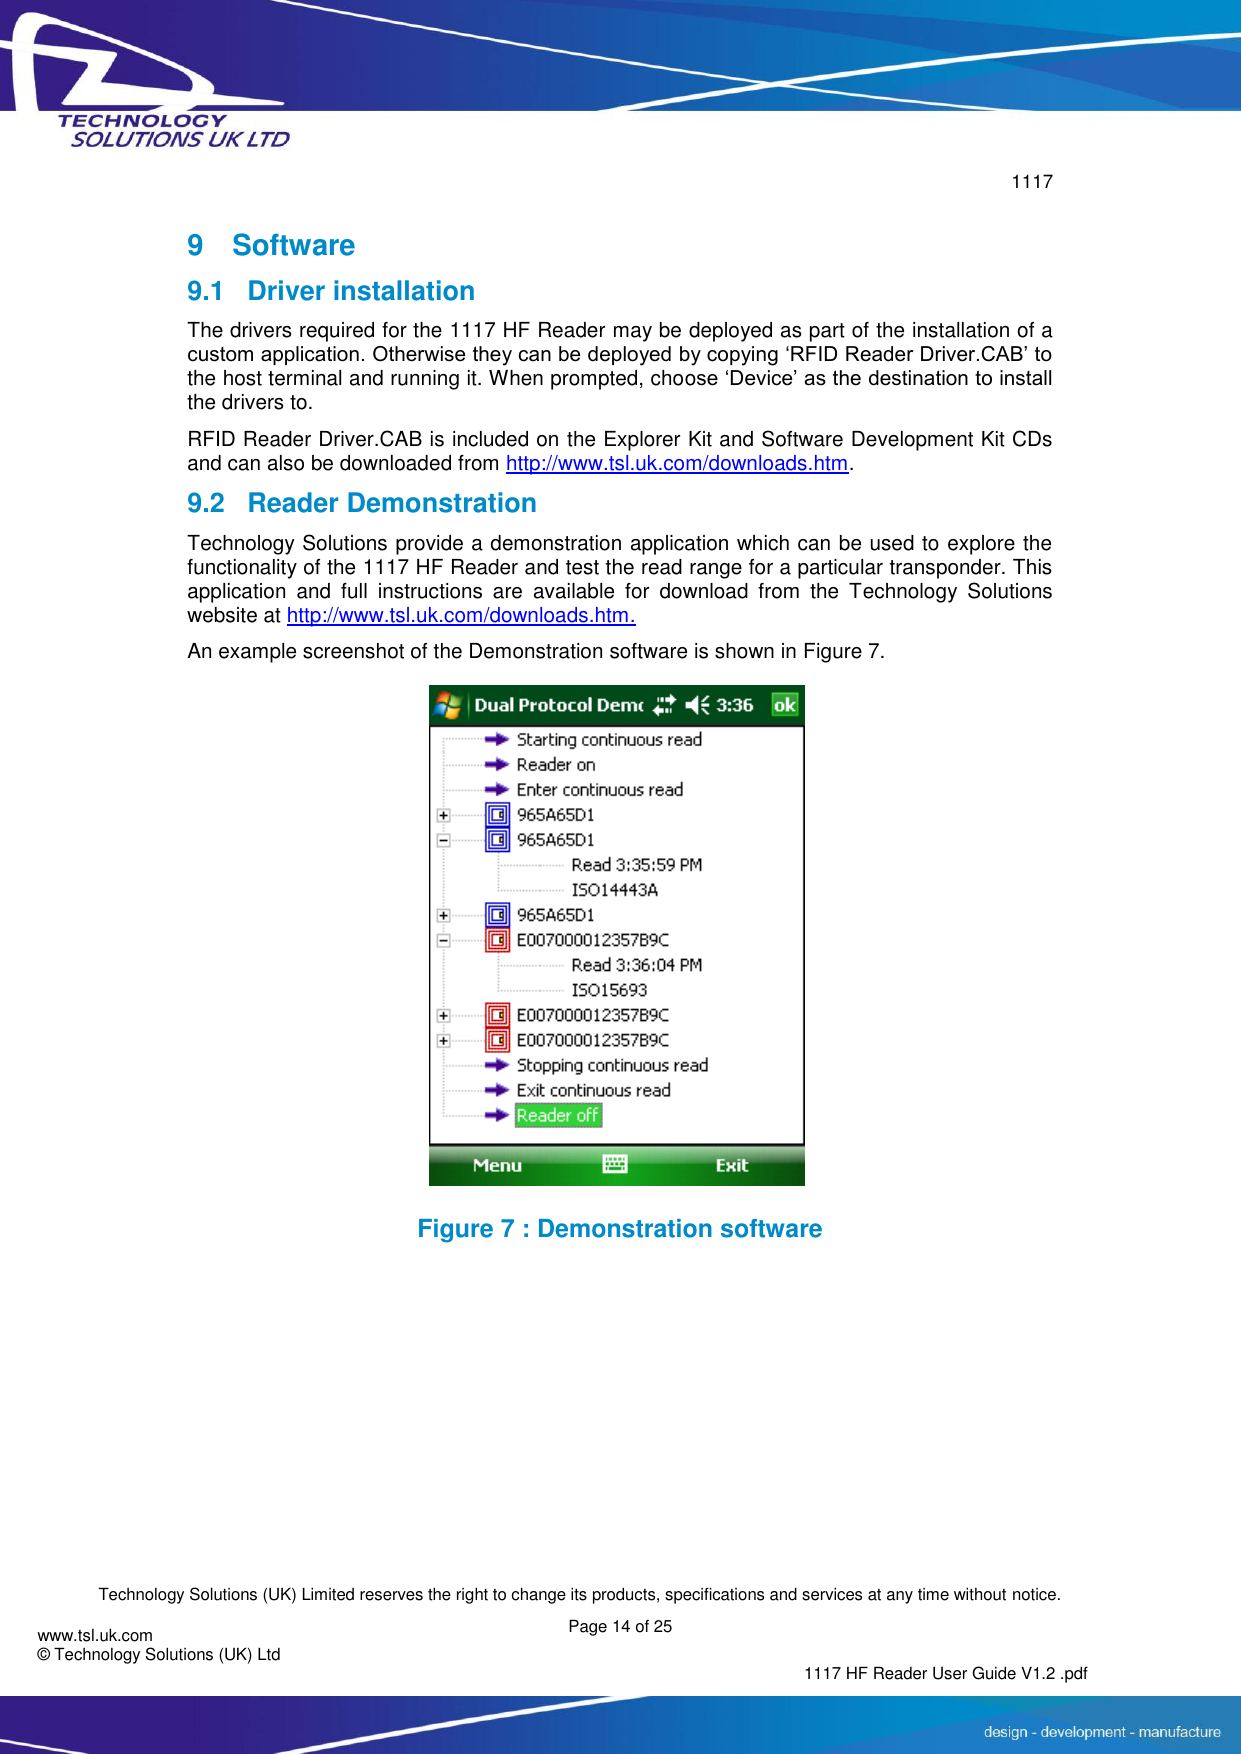        1117  Technology Solutions (UK) Limited reserves the right to change its products, specifications and services at any time without notice. Page 14 of 25 1117 HF Reader User Guide V1.2 .pdf www.tsl.uk.com © Technology Solutions (UK) Ltd   9  Software 9.1  Driver installation The drivers required for the 1117 HF Reader may be deployed as part of the installation of a custom application. Otherwise they can be deployed by copying ‘RFID Reader Driver.CAB’ to the host terminal and running it. When prompted, choose ‘Device’ as the destination to install the drivers to. RFID Reader Driver.CAB is included on the Explorer Kit and Software Development Kit CDs and can also be downloaded from http://www.tsl.uk.com/downloads.htm. 9.2 Reader Demonstration Technology Solutions provide a demonstration application which can be used to explore the functionality of the 1117 HF Reader and test the read range for a particular transponder. This application  and  full  instructions  are  available  for  download  from  the  Technology  Solutions website at http://www.tsl.uk.com/downloads.htm.  An example screenshot of the Demonstration software is shown in Figure 7.  Figure 7 : Demonstration software     